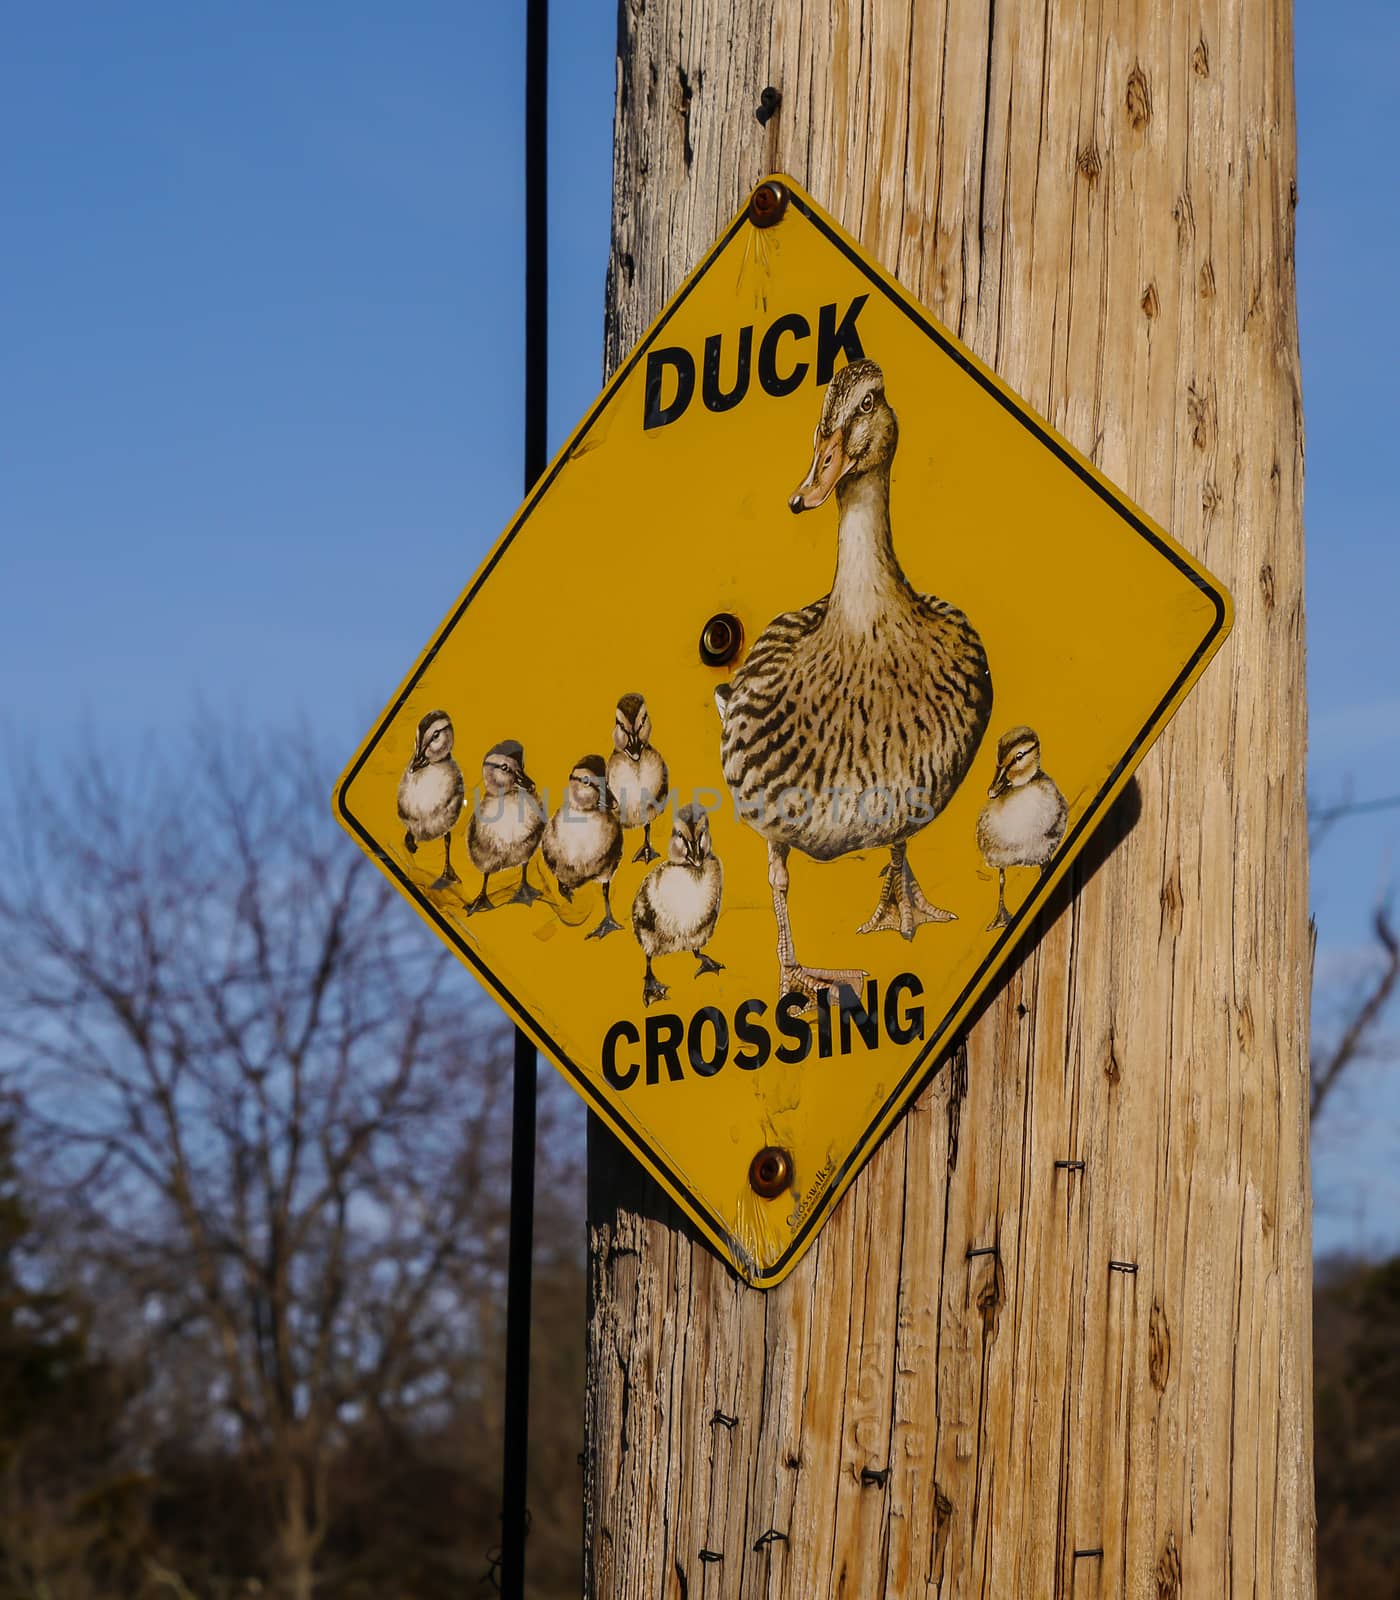 Attention! Ducks crossing by wit_gorski